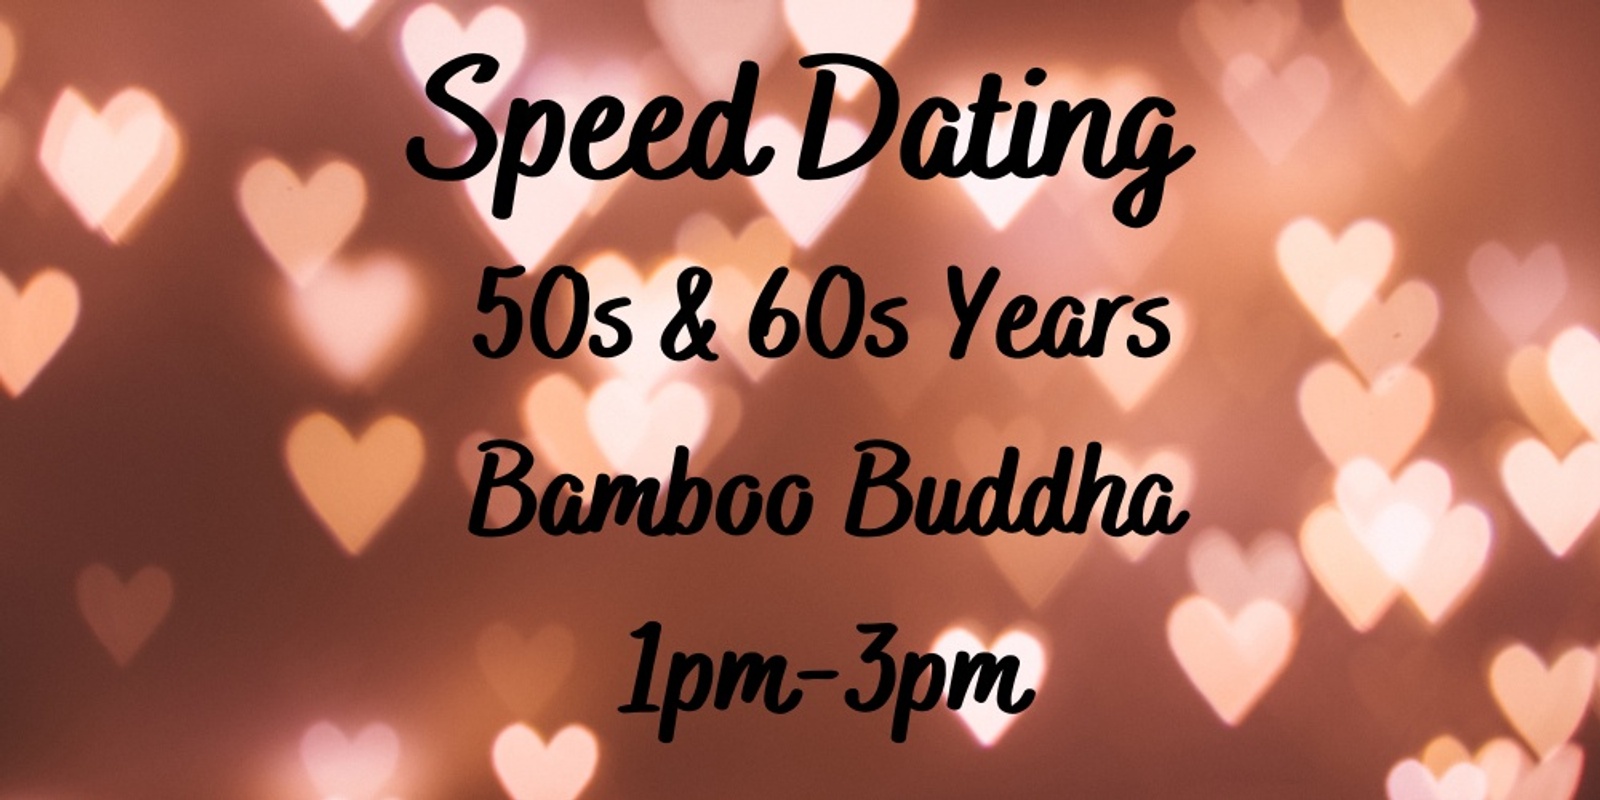 50s & 60s years Speed Dating 